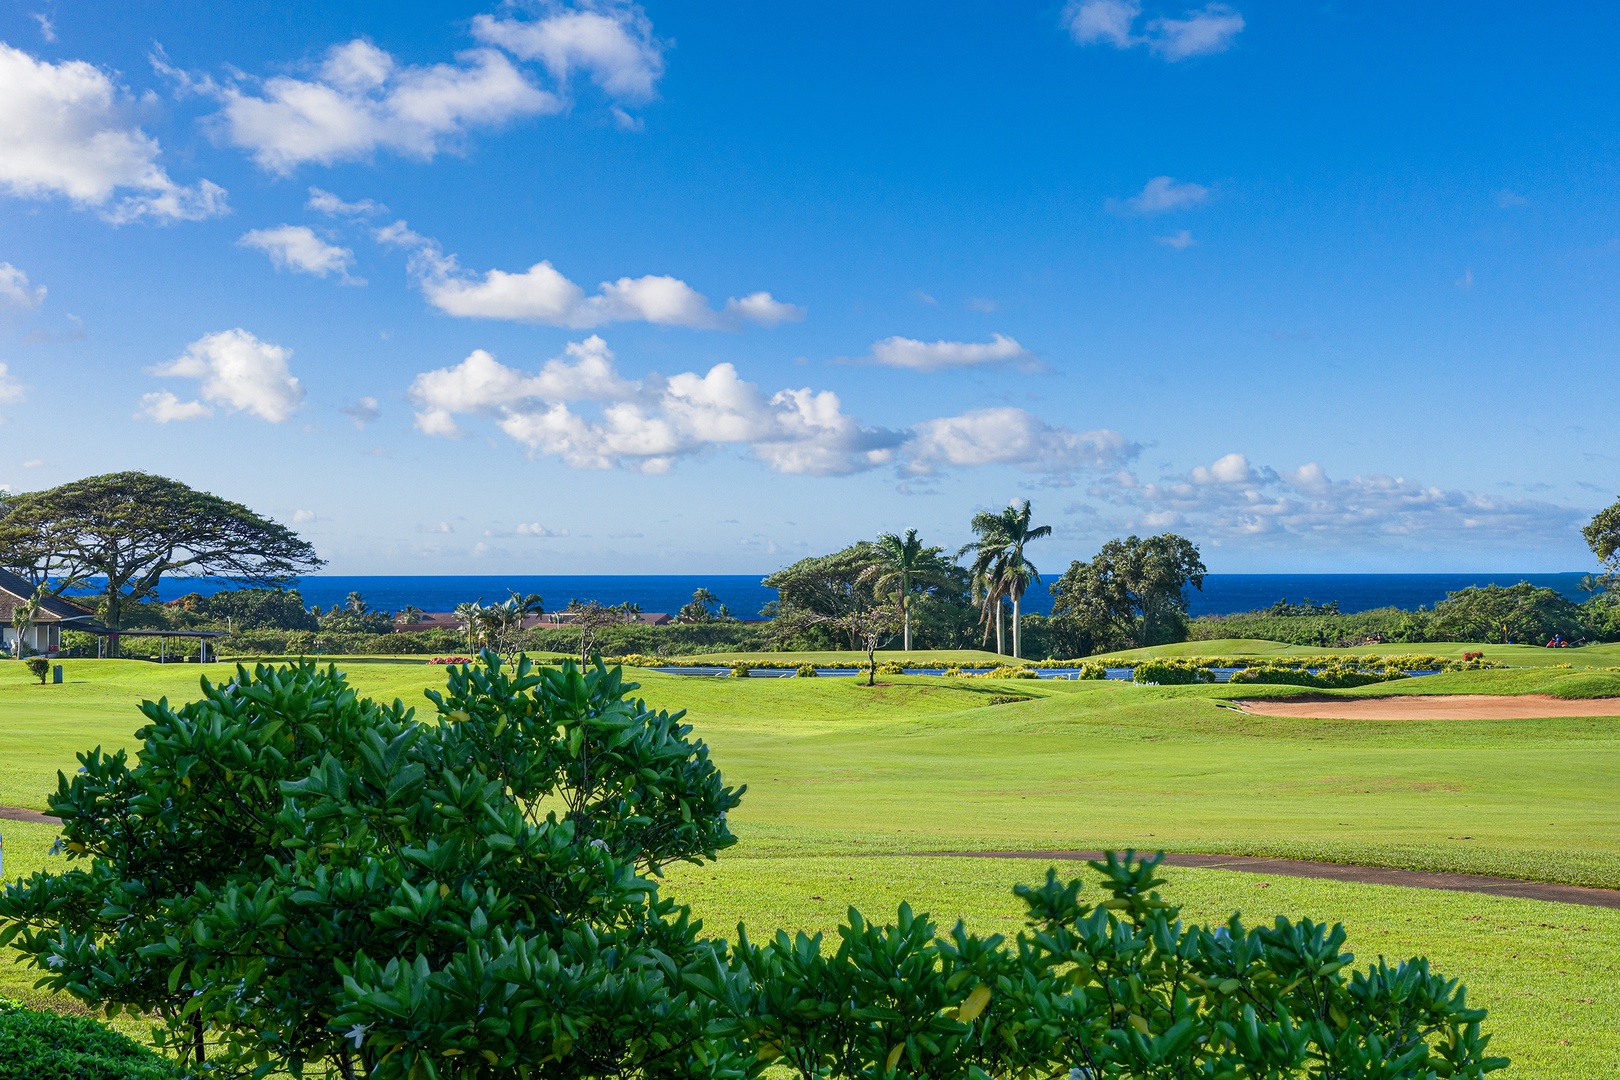 Koloa Vacation Rentals, Pili Mai 7J - Lush golf greens with ocean views, a golfer's delight in a tropical setting.